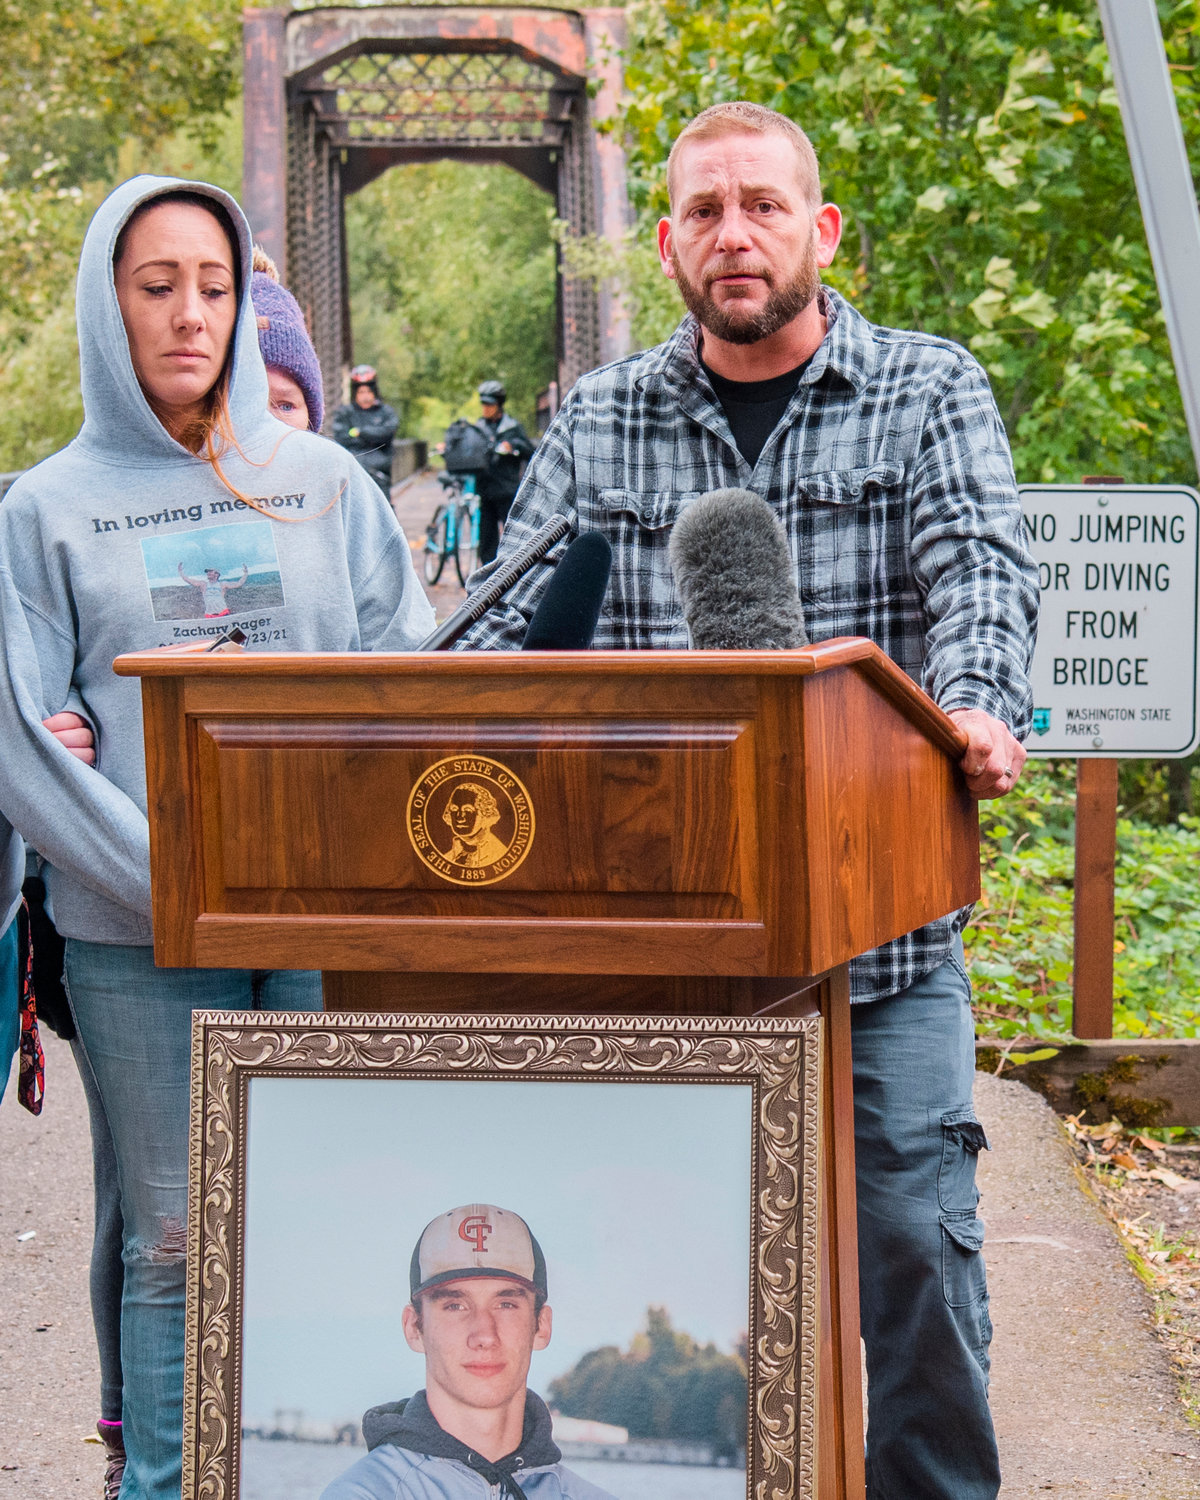 Lee Hines talks about the life and legacy of Zachary Rager and goals to prevent similar deaths from occurring while offering to help raise money for signs to be erected near bodies of water where there is a risk of cold water shock and drowning.